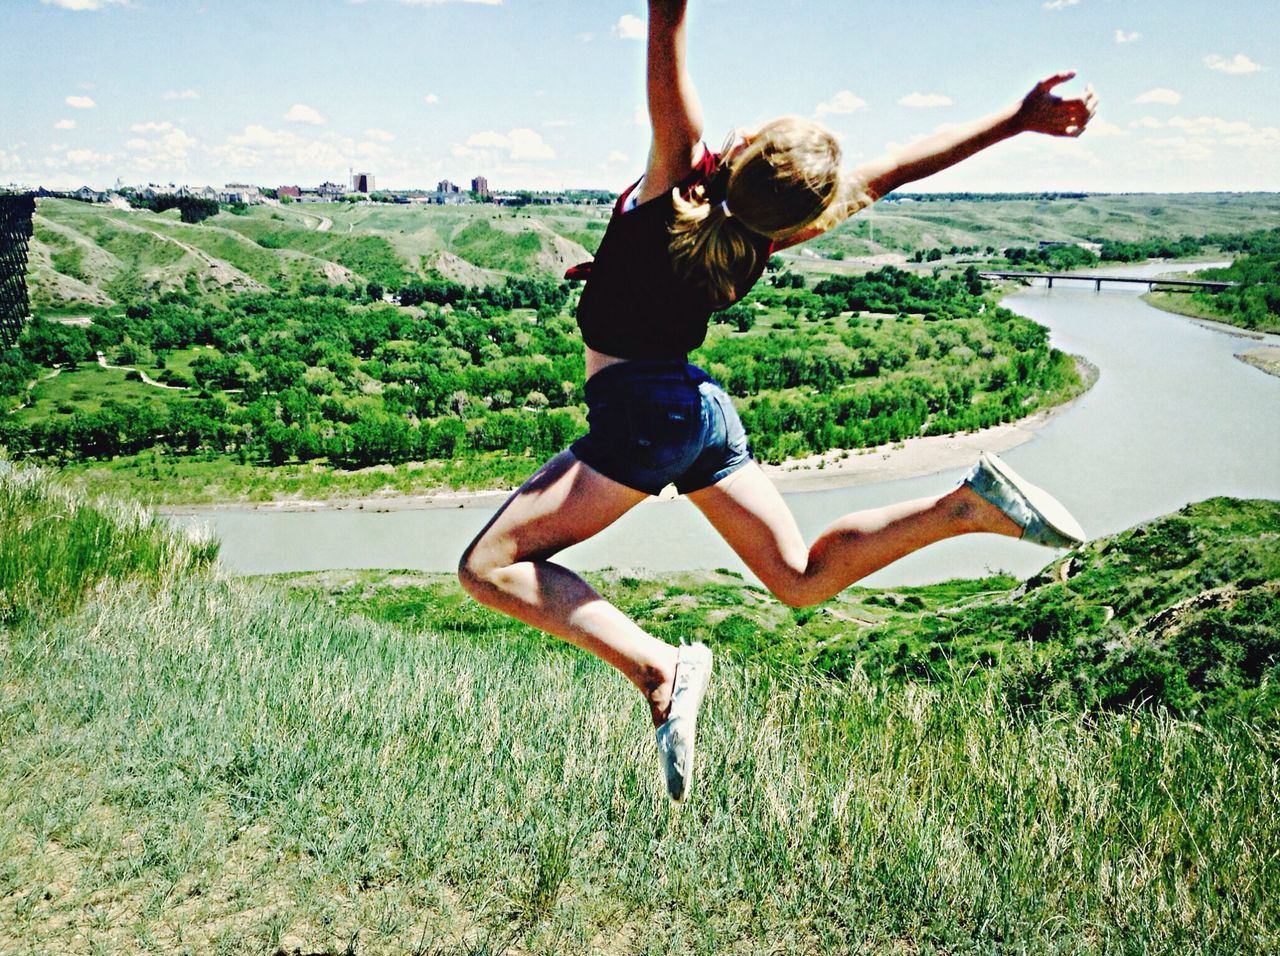 leisure activity, lifestyles, full length, grass, young adult, mid-air, jumping, enjoyment, tree, fun, carefree, young women, sky, casual clothing, arms raised, arms outstretched, person, freedom